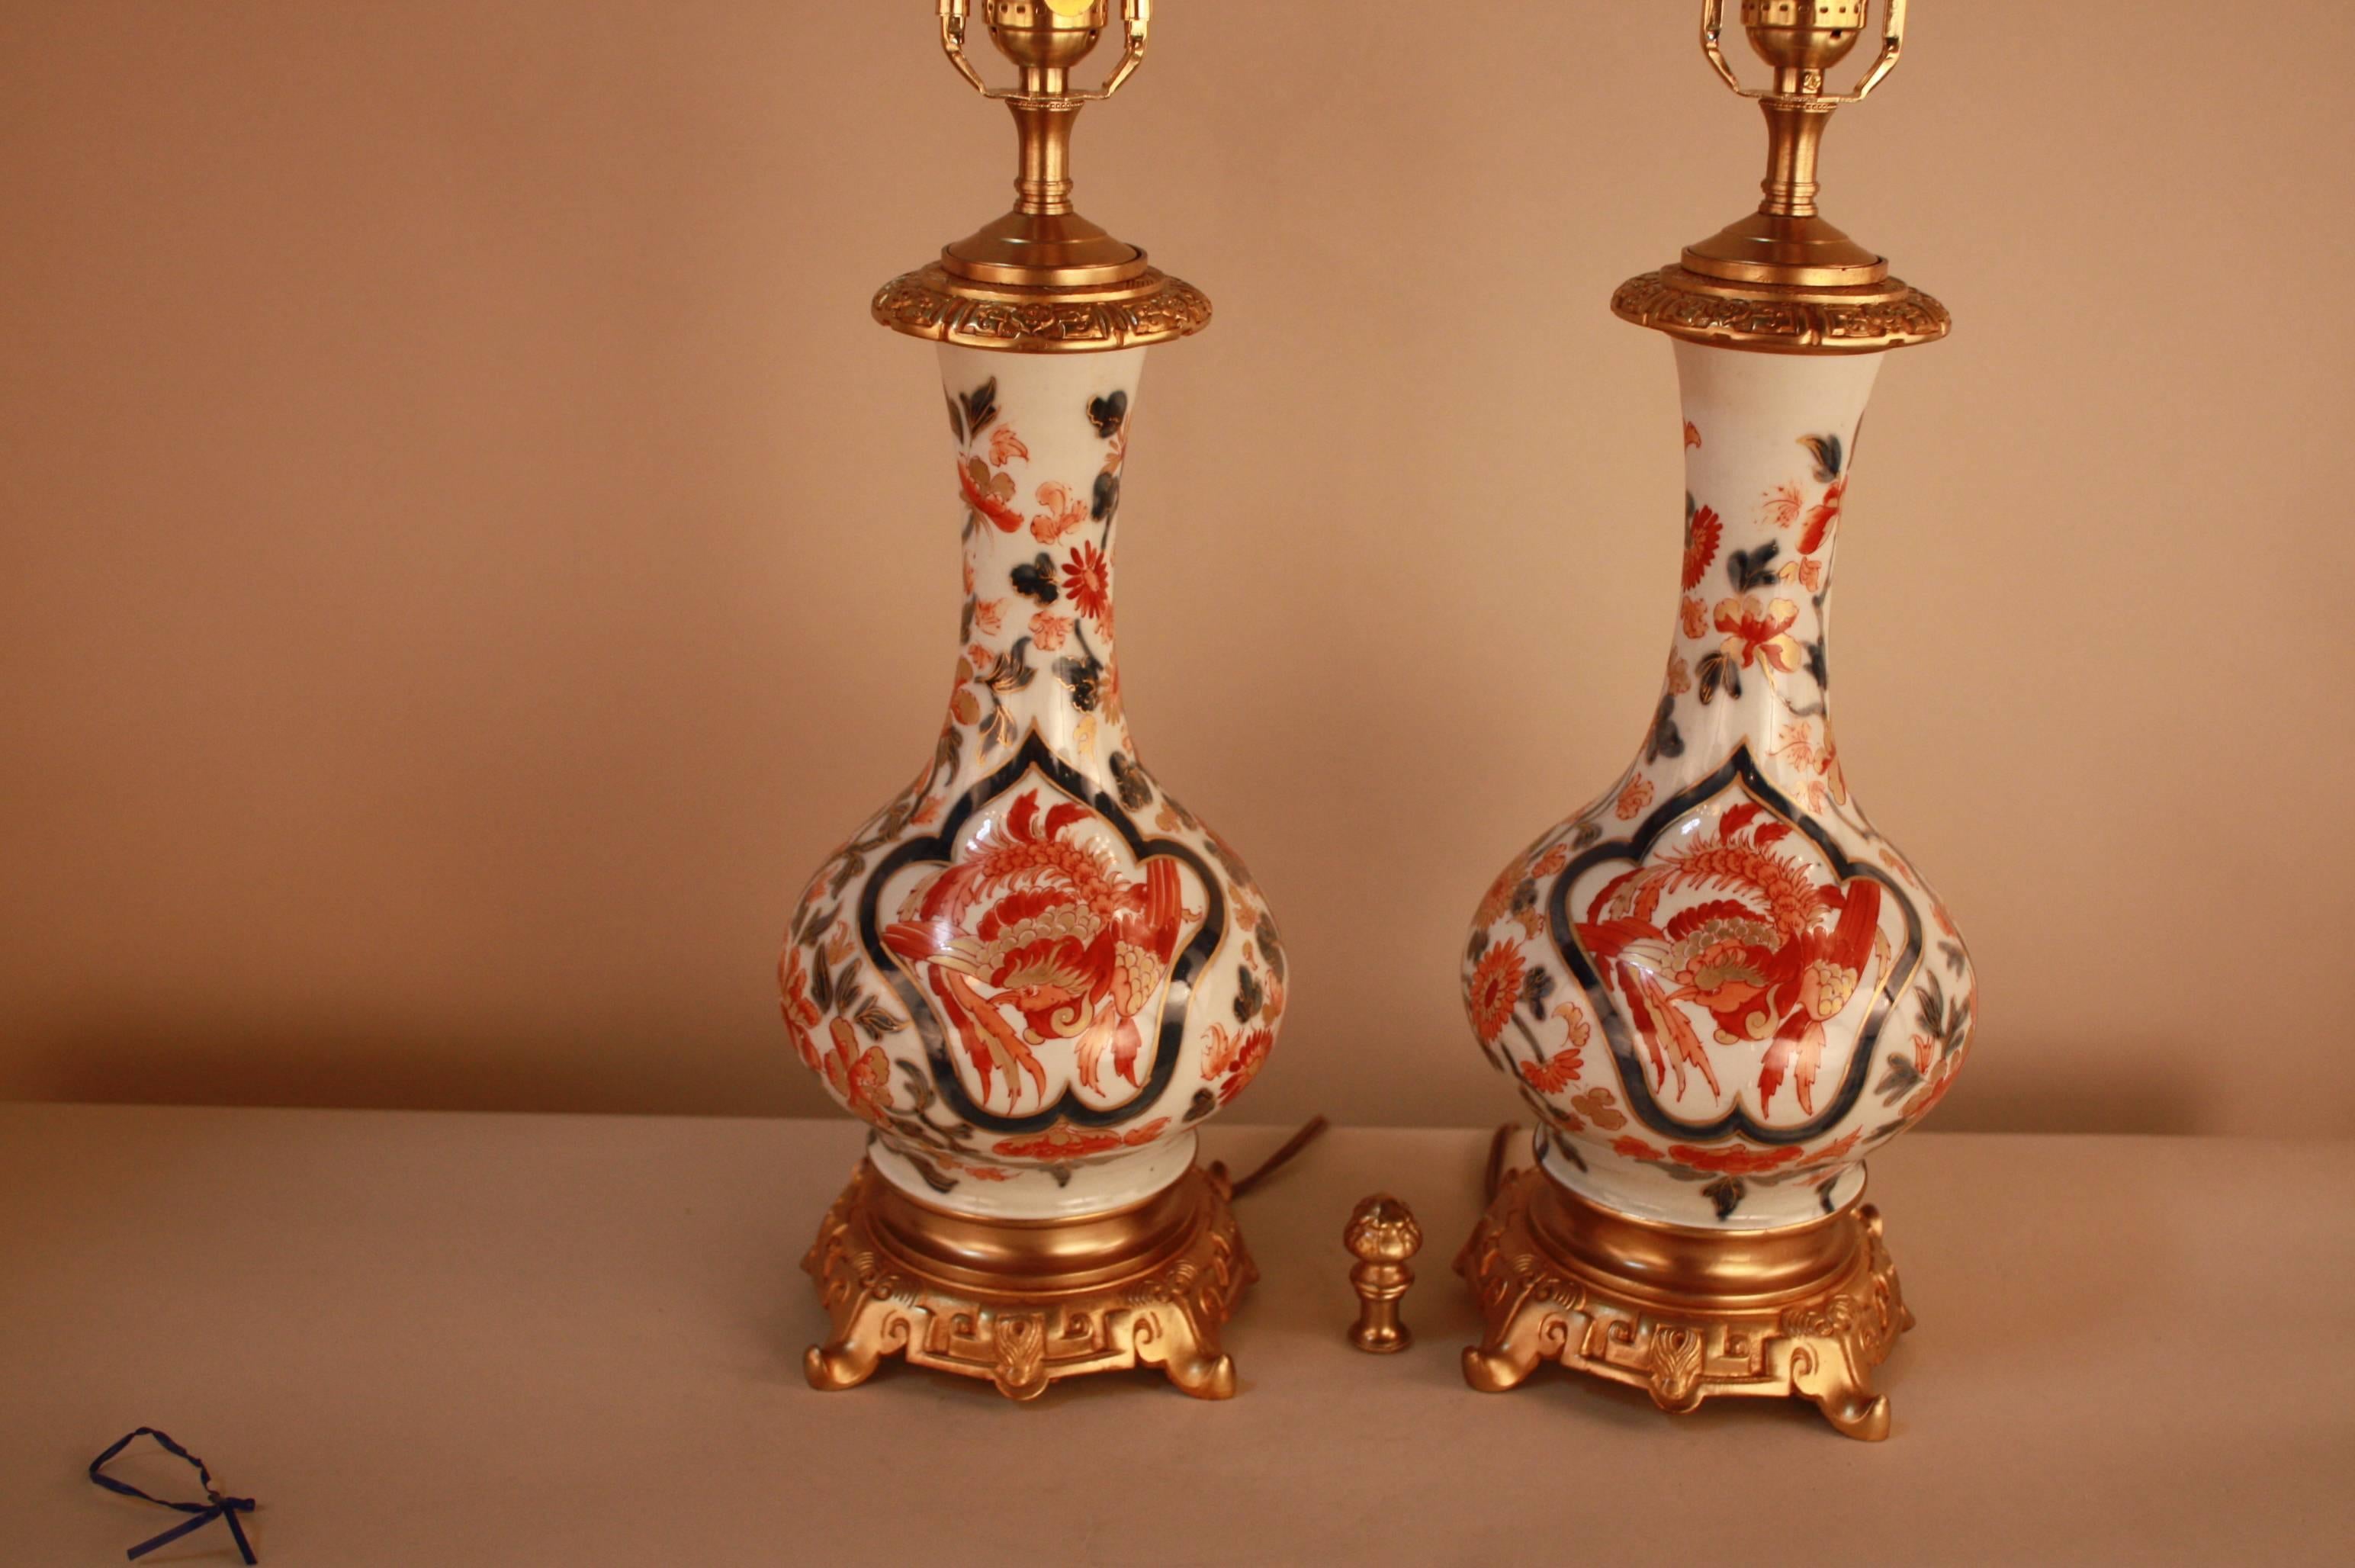 A beautiful pair of 19th century hand-painted porcelain lamps, depicting a dragon on one side and a bird on the reverse side. Base made of bronze. 

Originally oil lamps, these have been modified with electric wiring and fitted with new box pleat